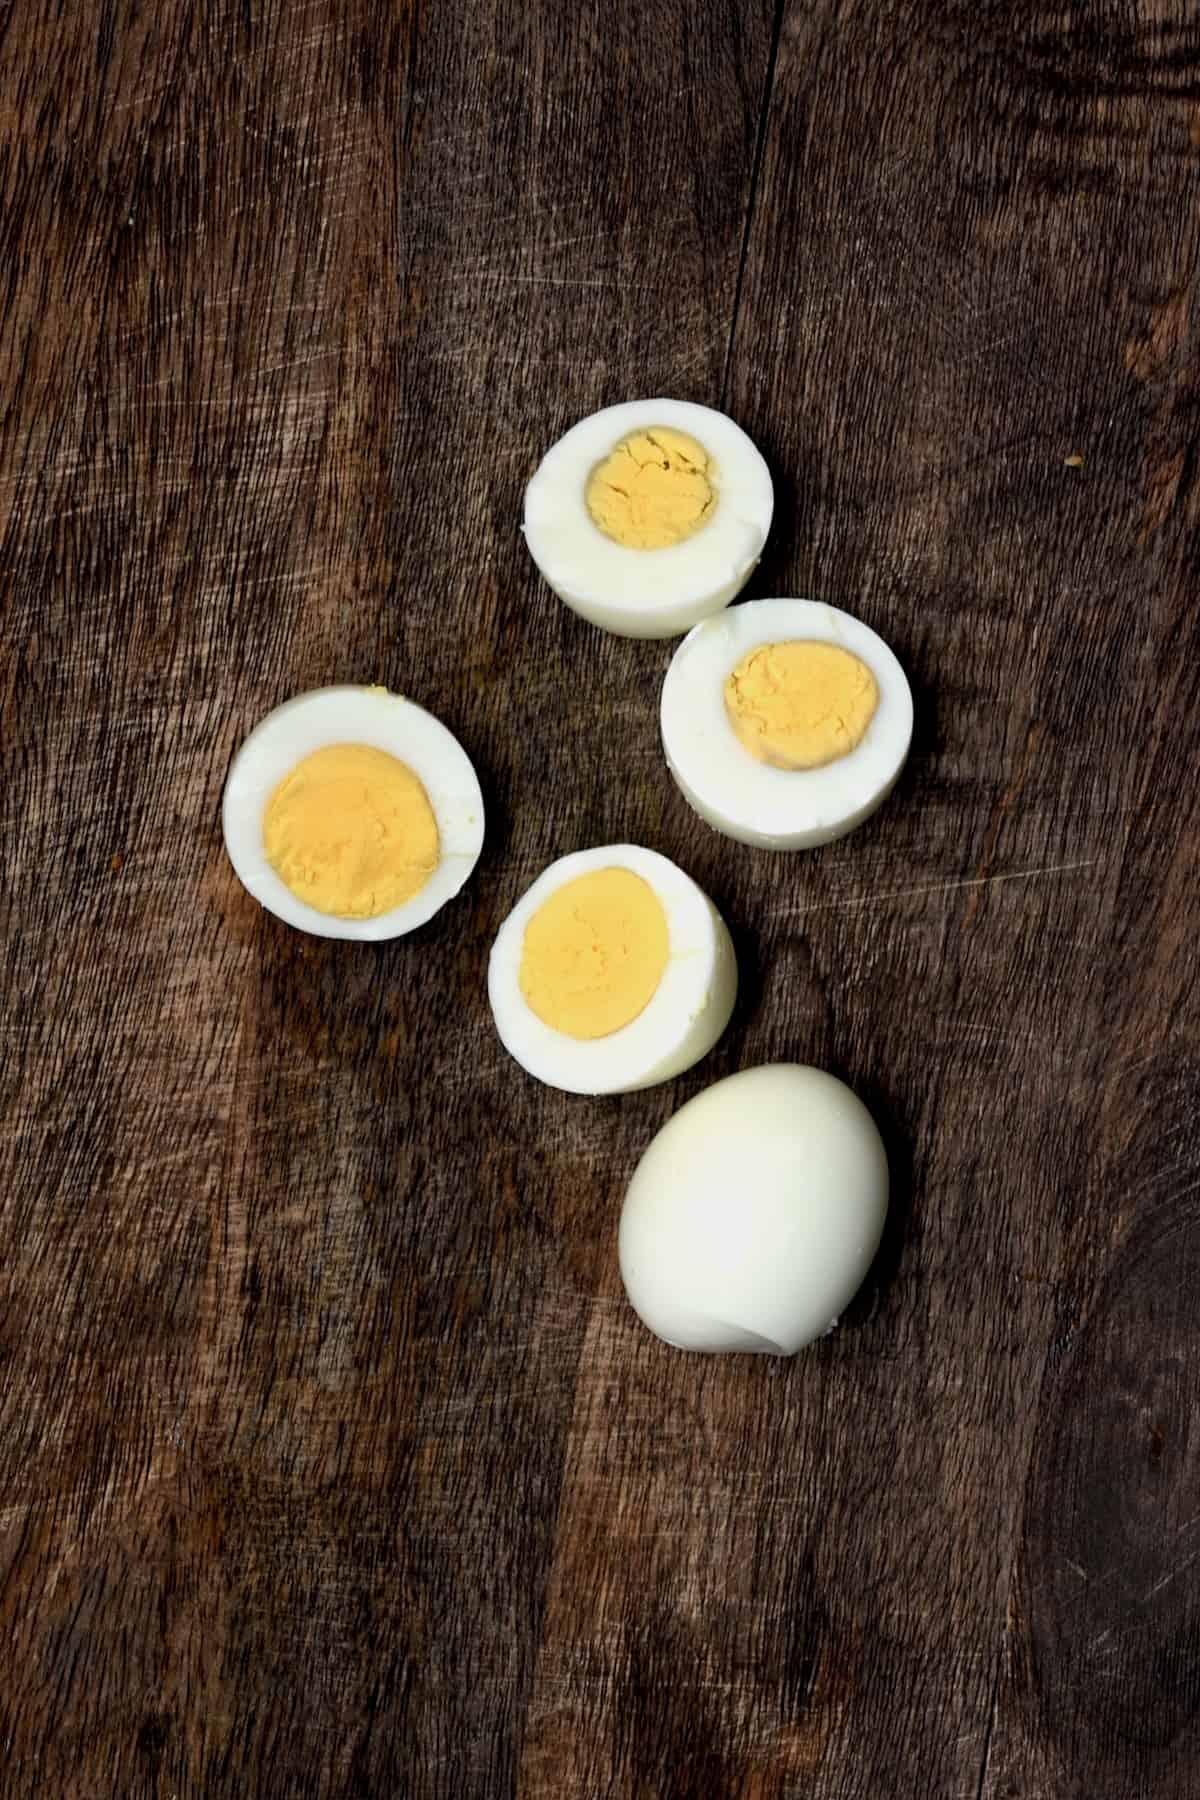 Three hard boiled eggs two of which are cut in half